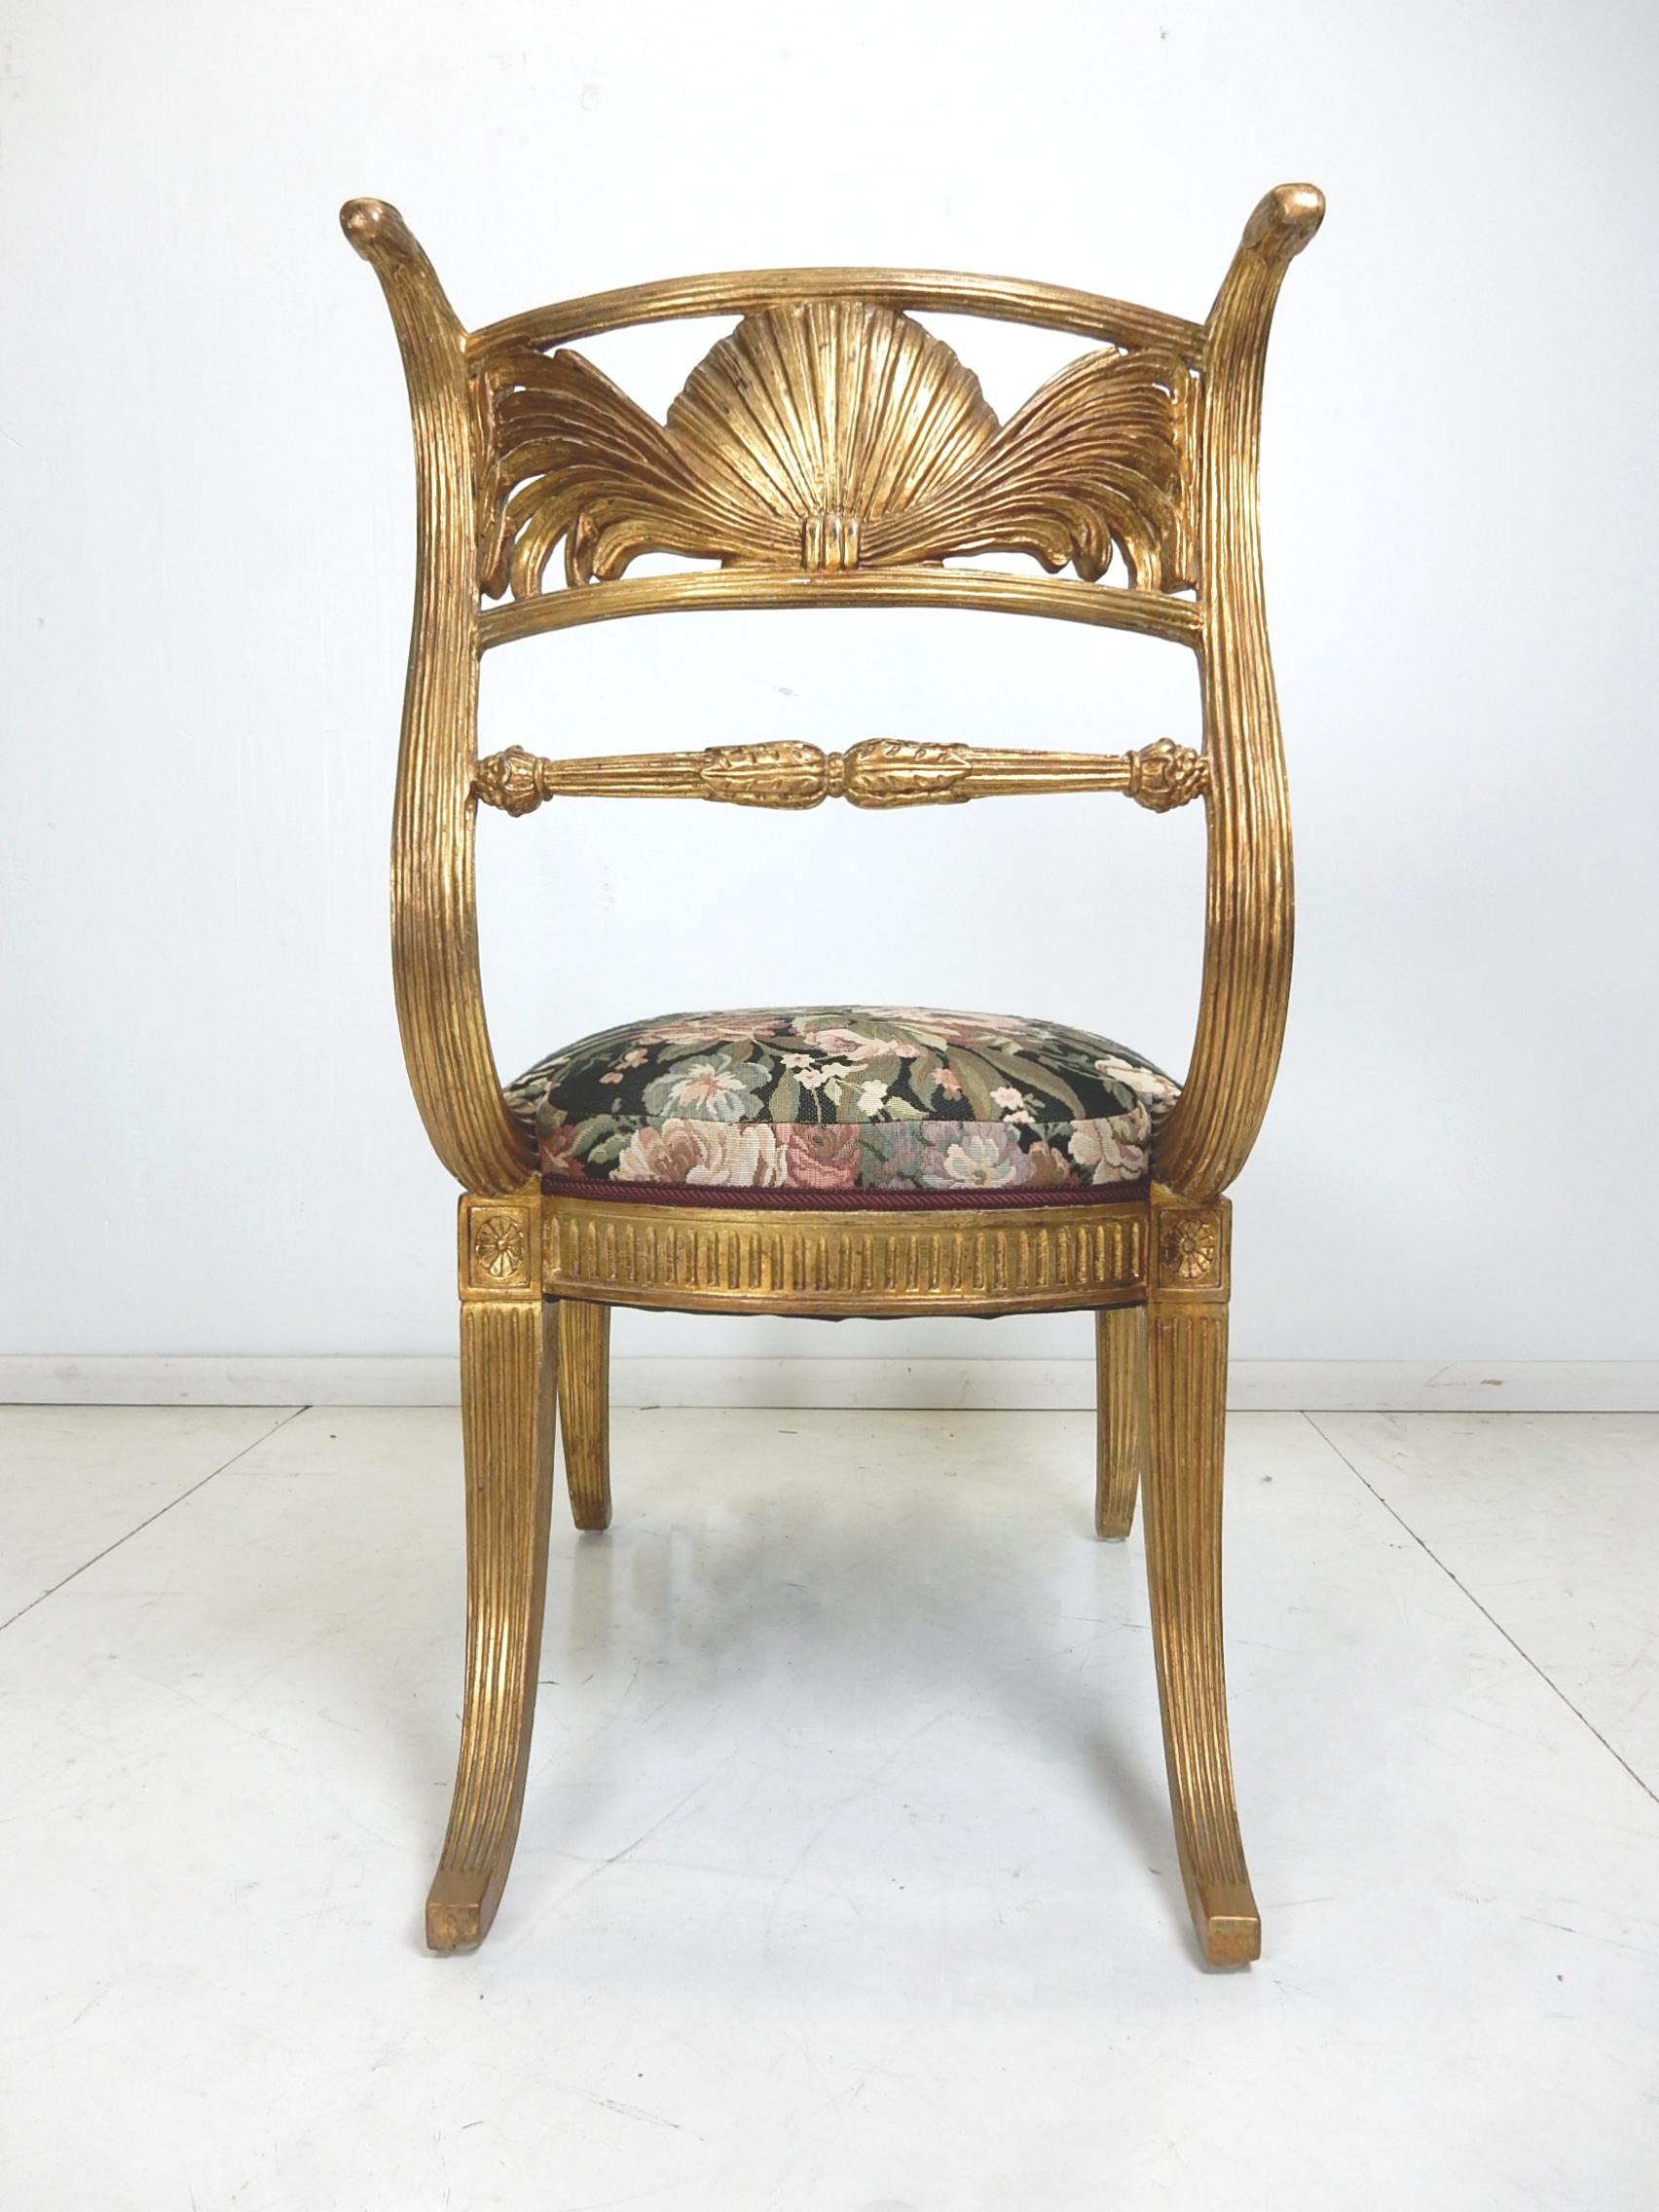 Empire Revival French Empire Gold Gilded Winged Shell Klismos Chairs